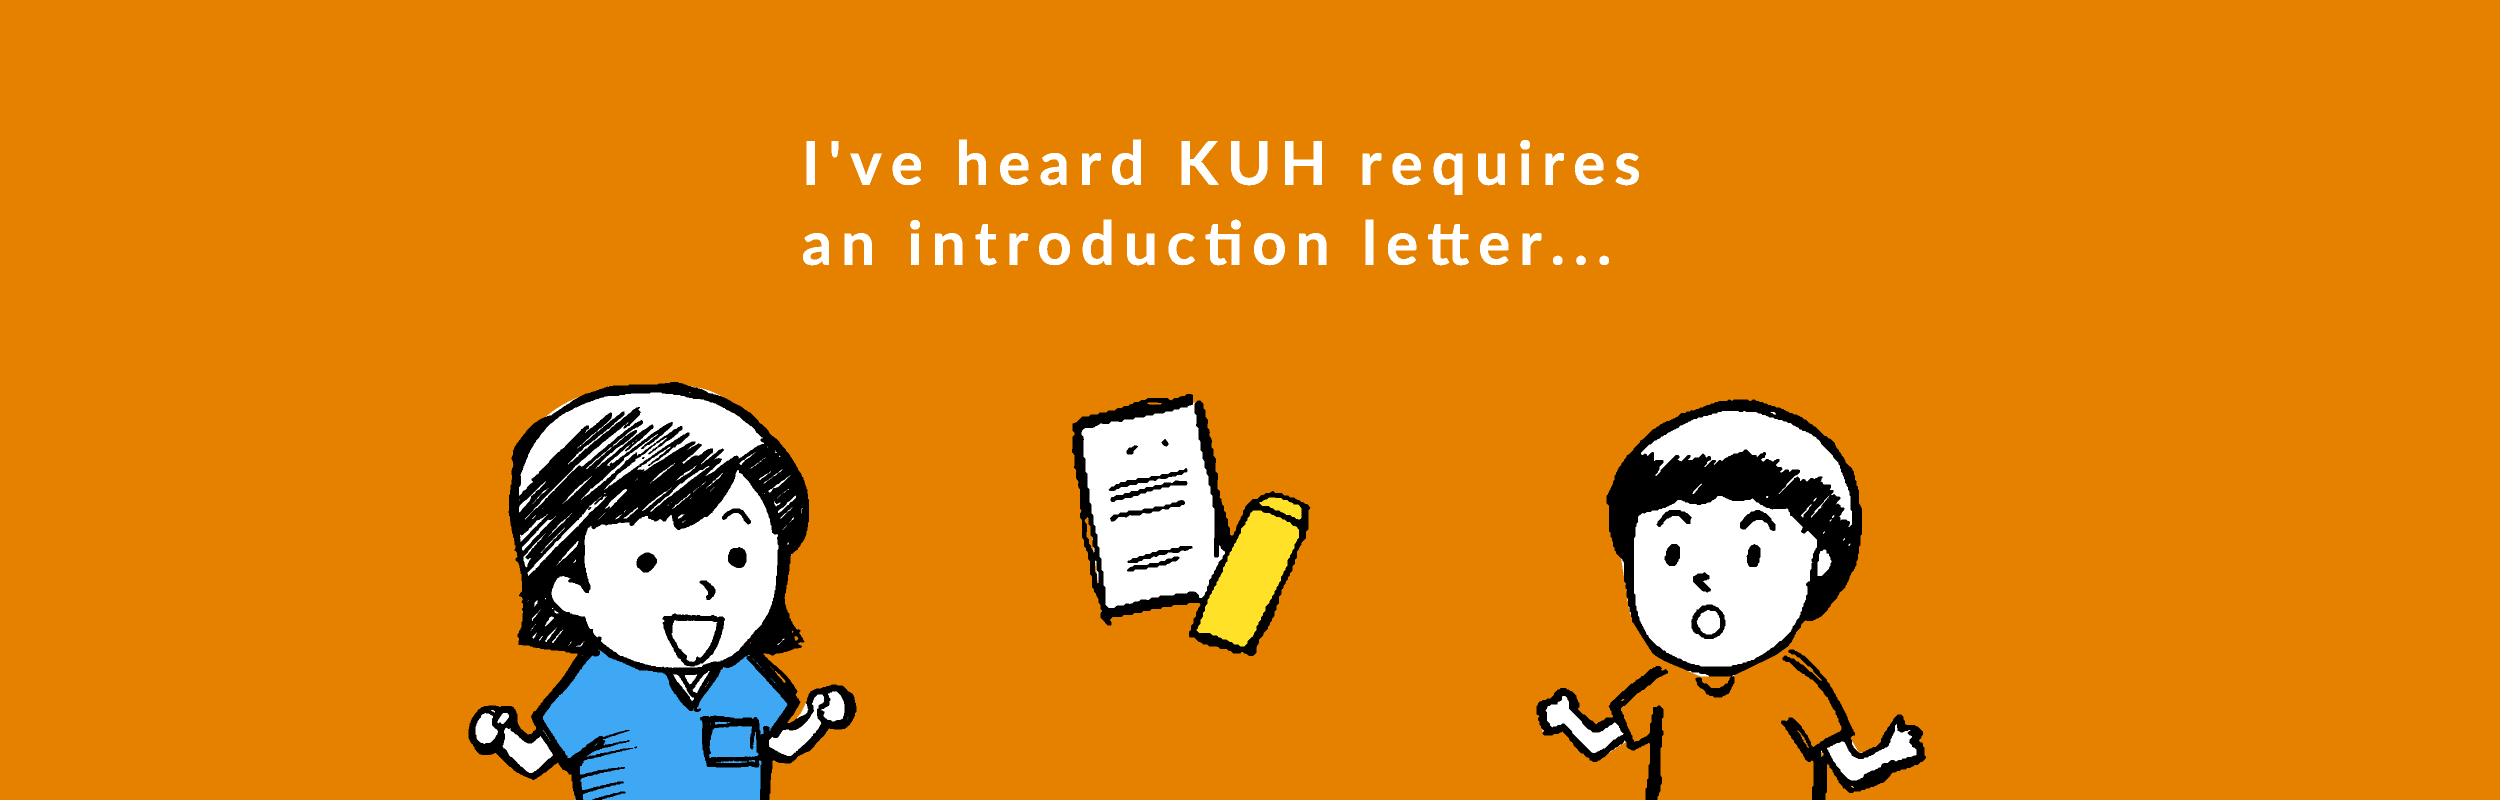 I've heard KUH requires an introduction letter...